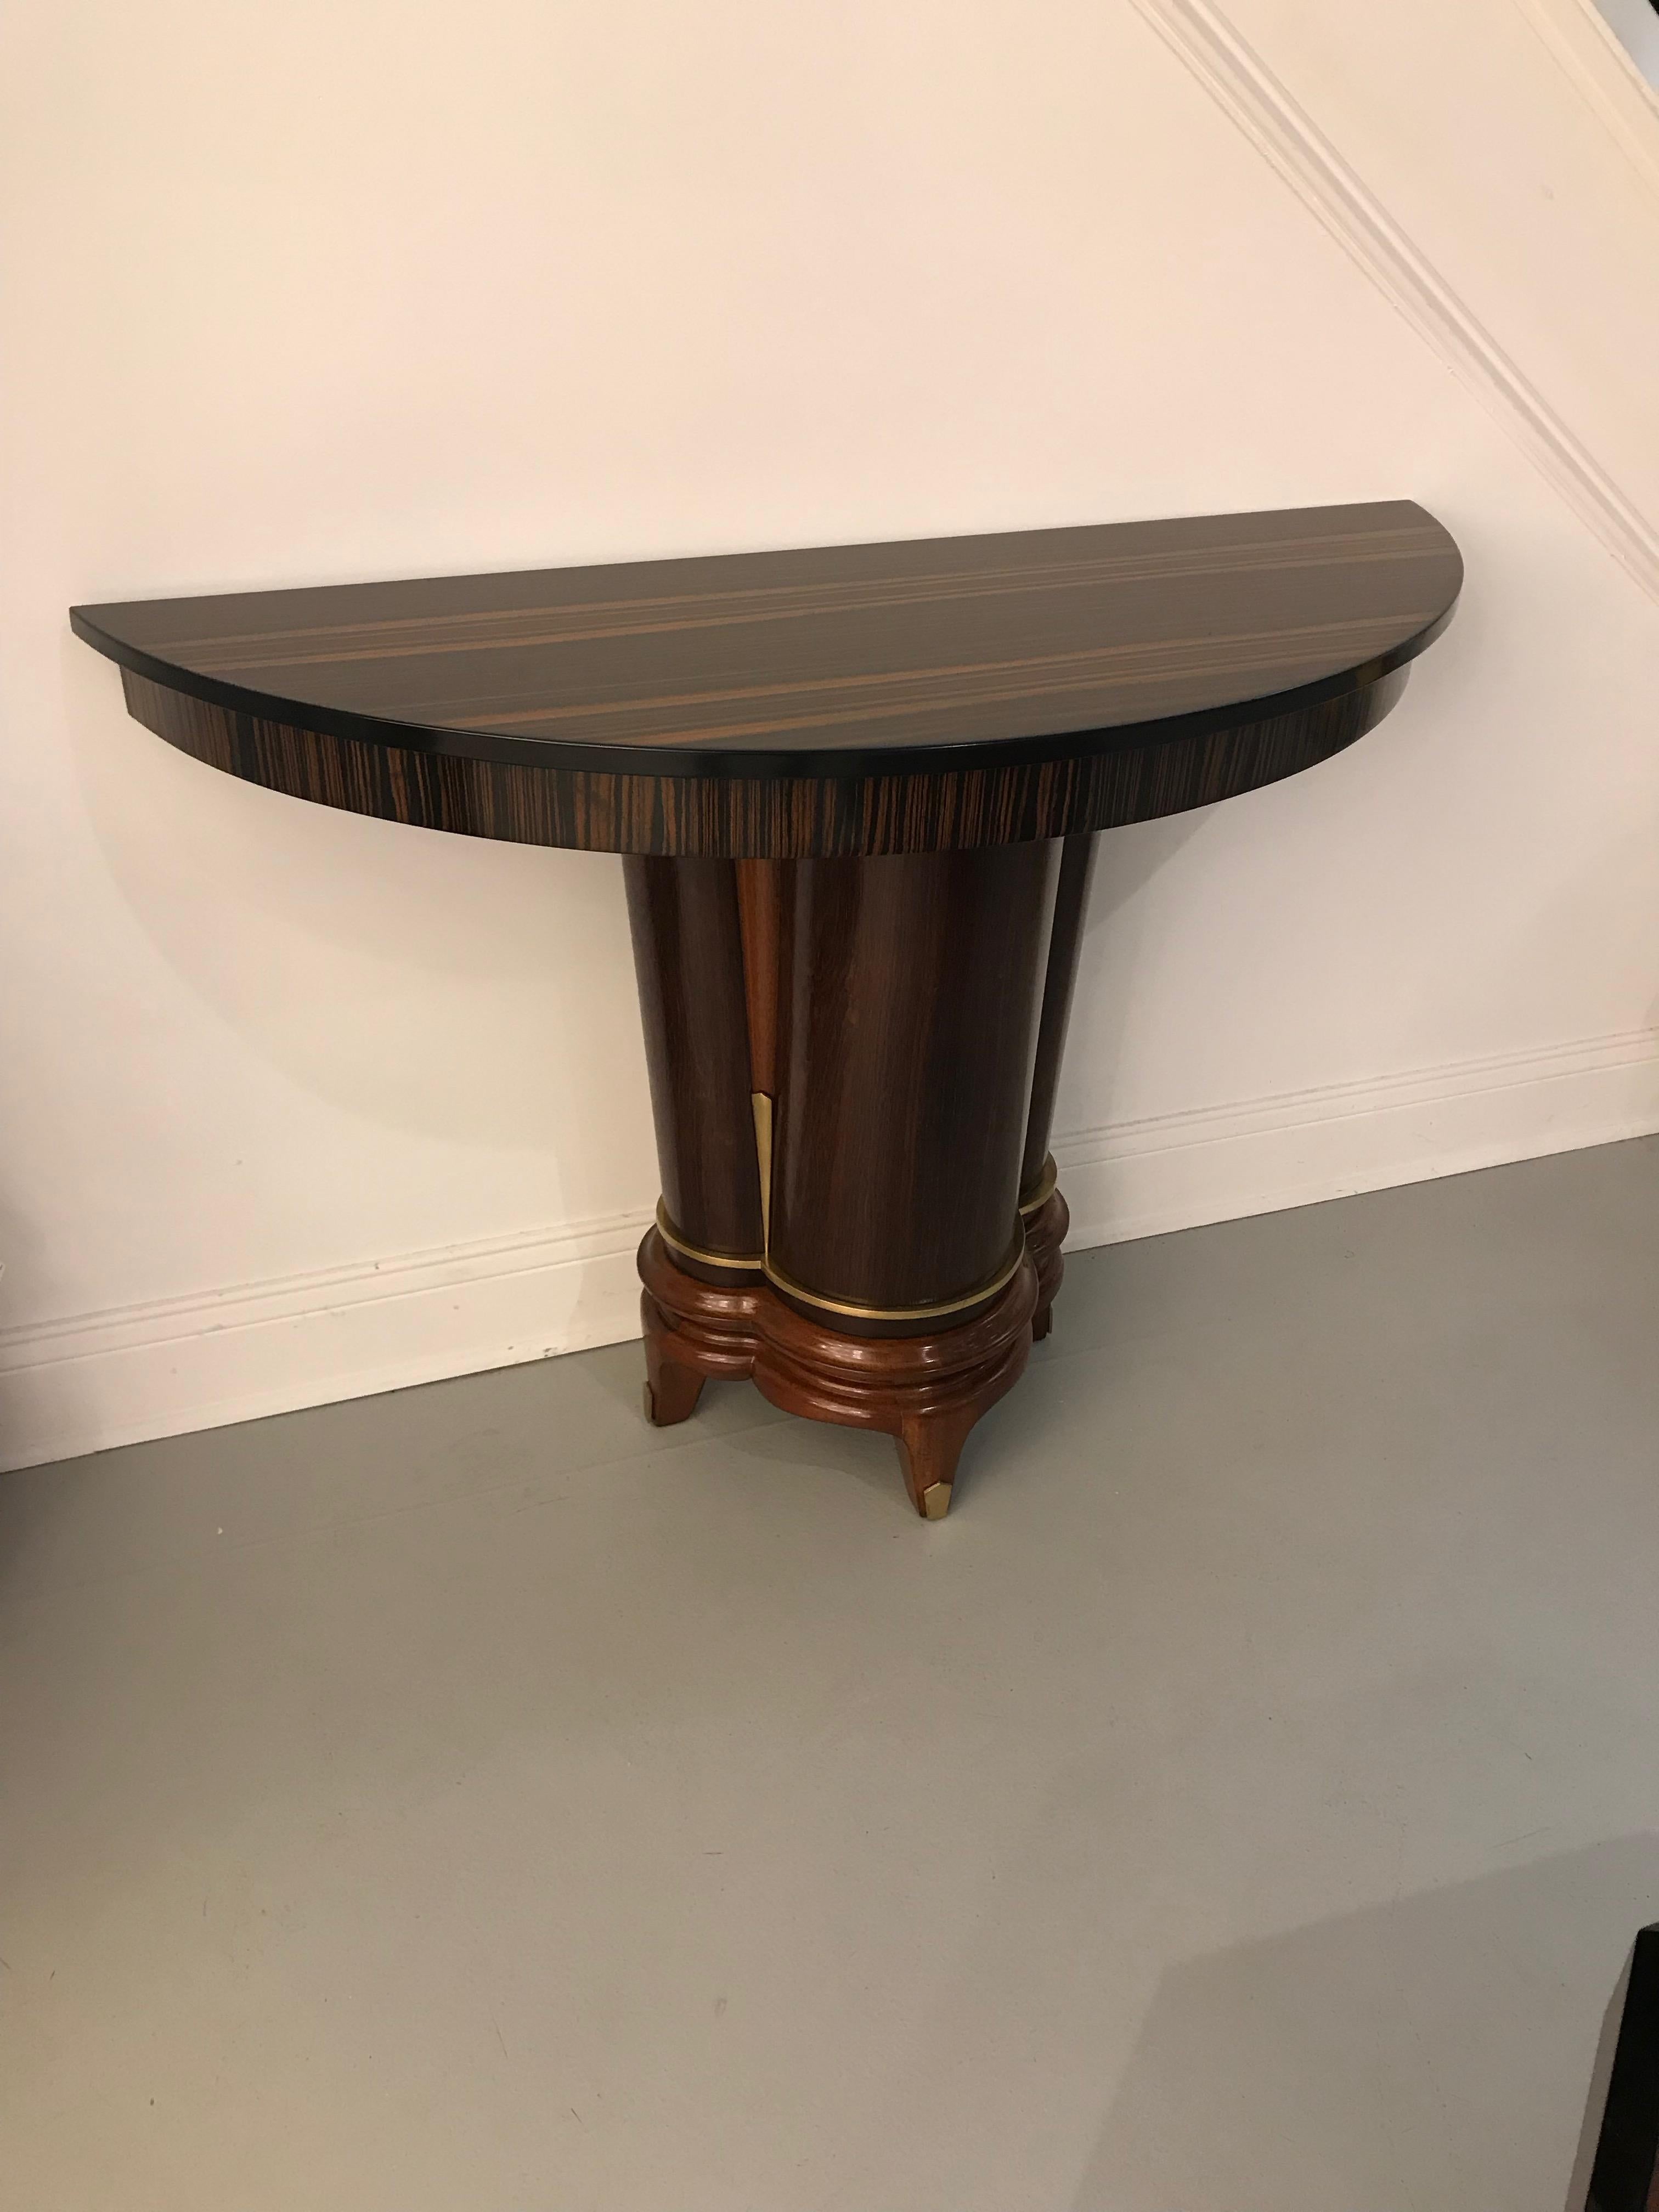 Beautiful French Art Deco Macassar console table. Half moon Macassar top sitting on gorgeous deco base with brass hardware.